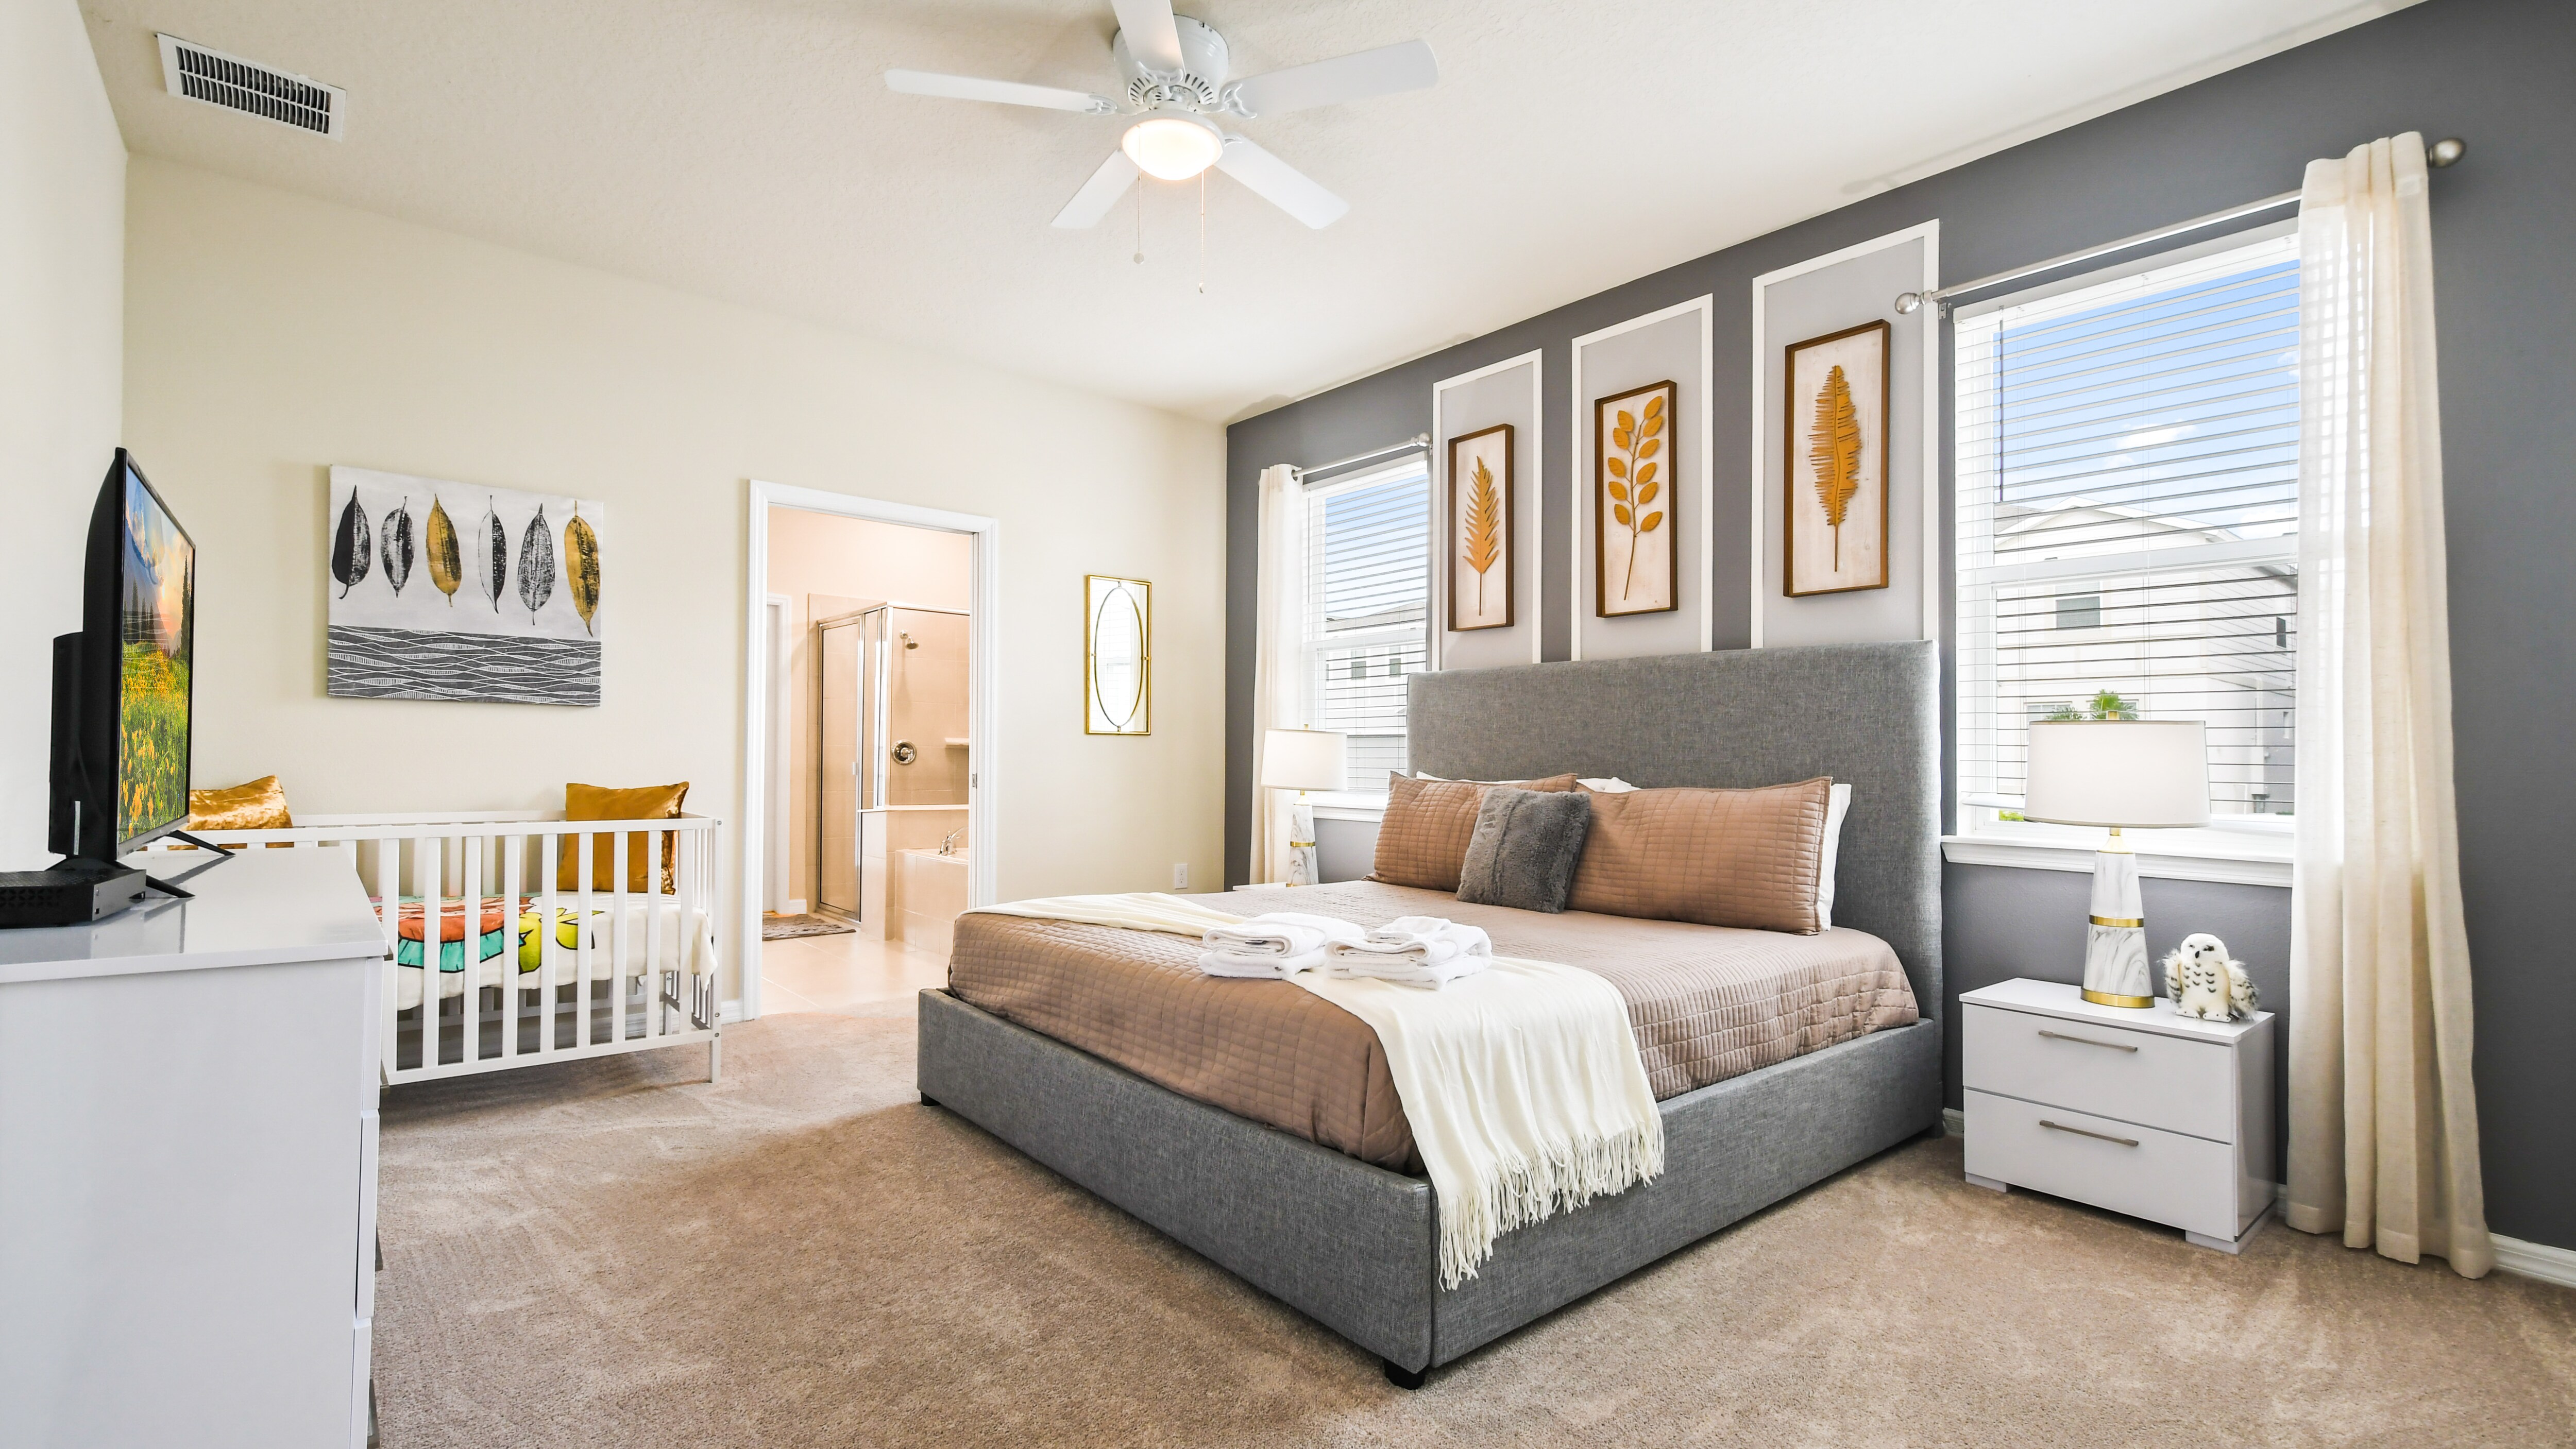 The master bedroom features a luxuriously large king bed with a crib